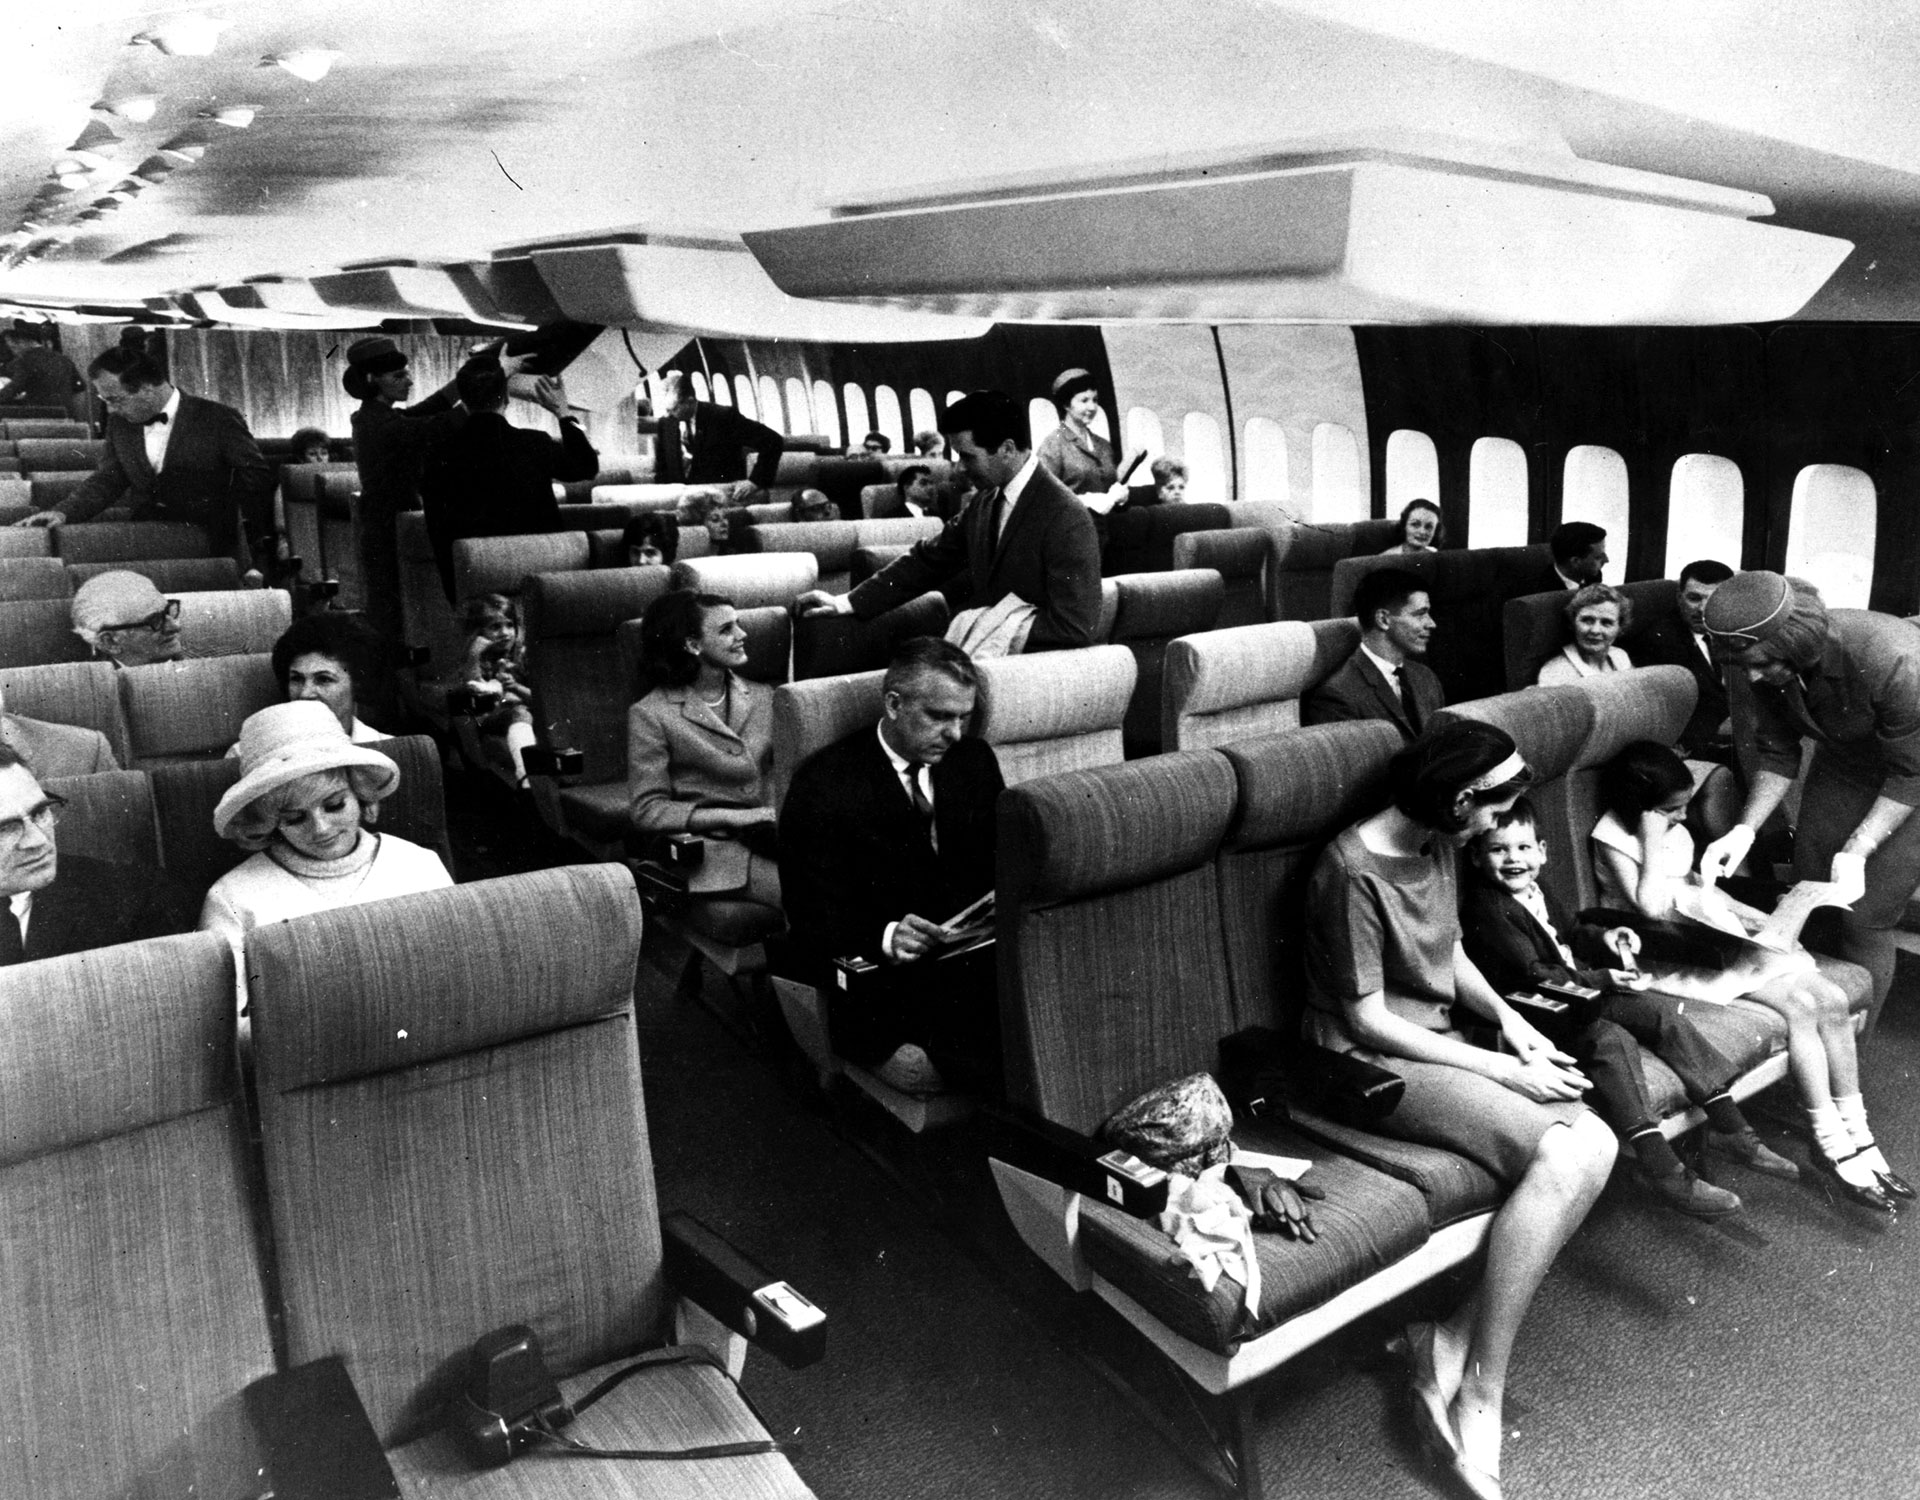 1968: Life-size model of the Boeing 747 passenger plane.  Alan Band/Keystone/Getty Images